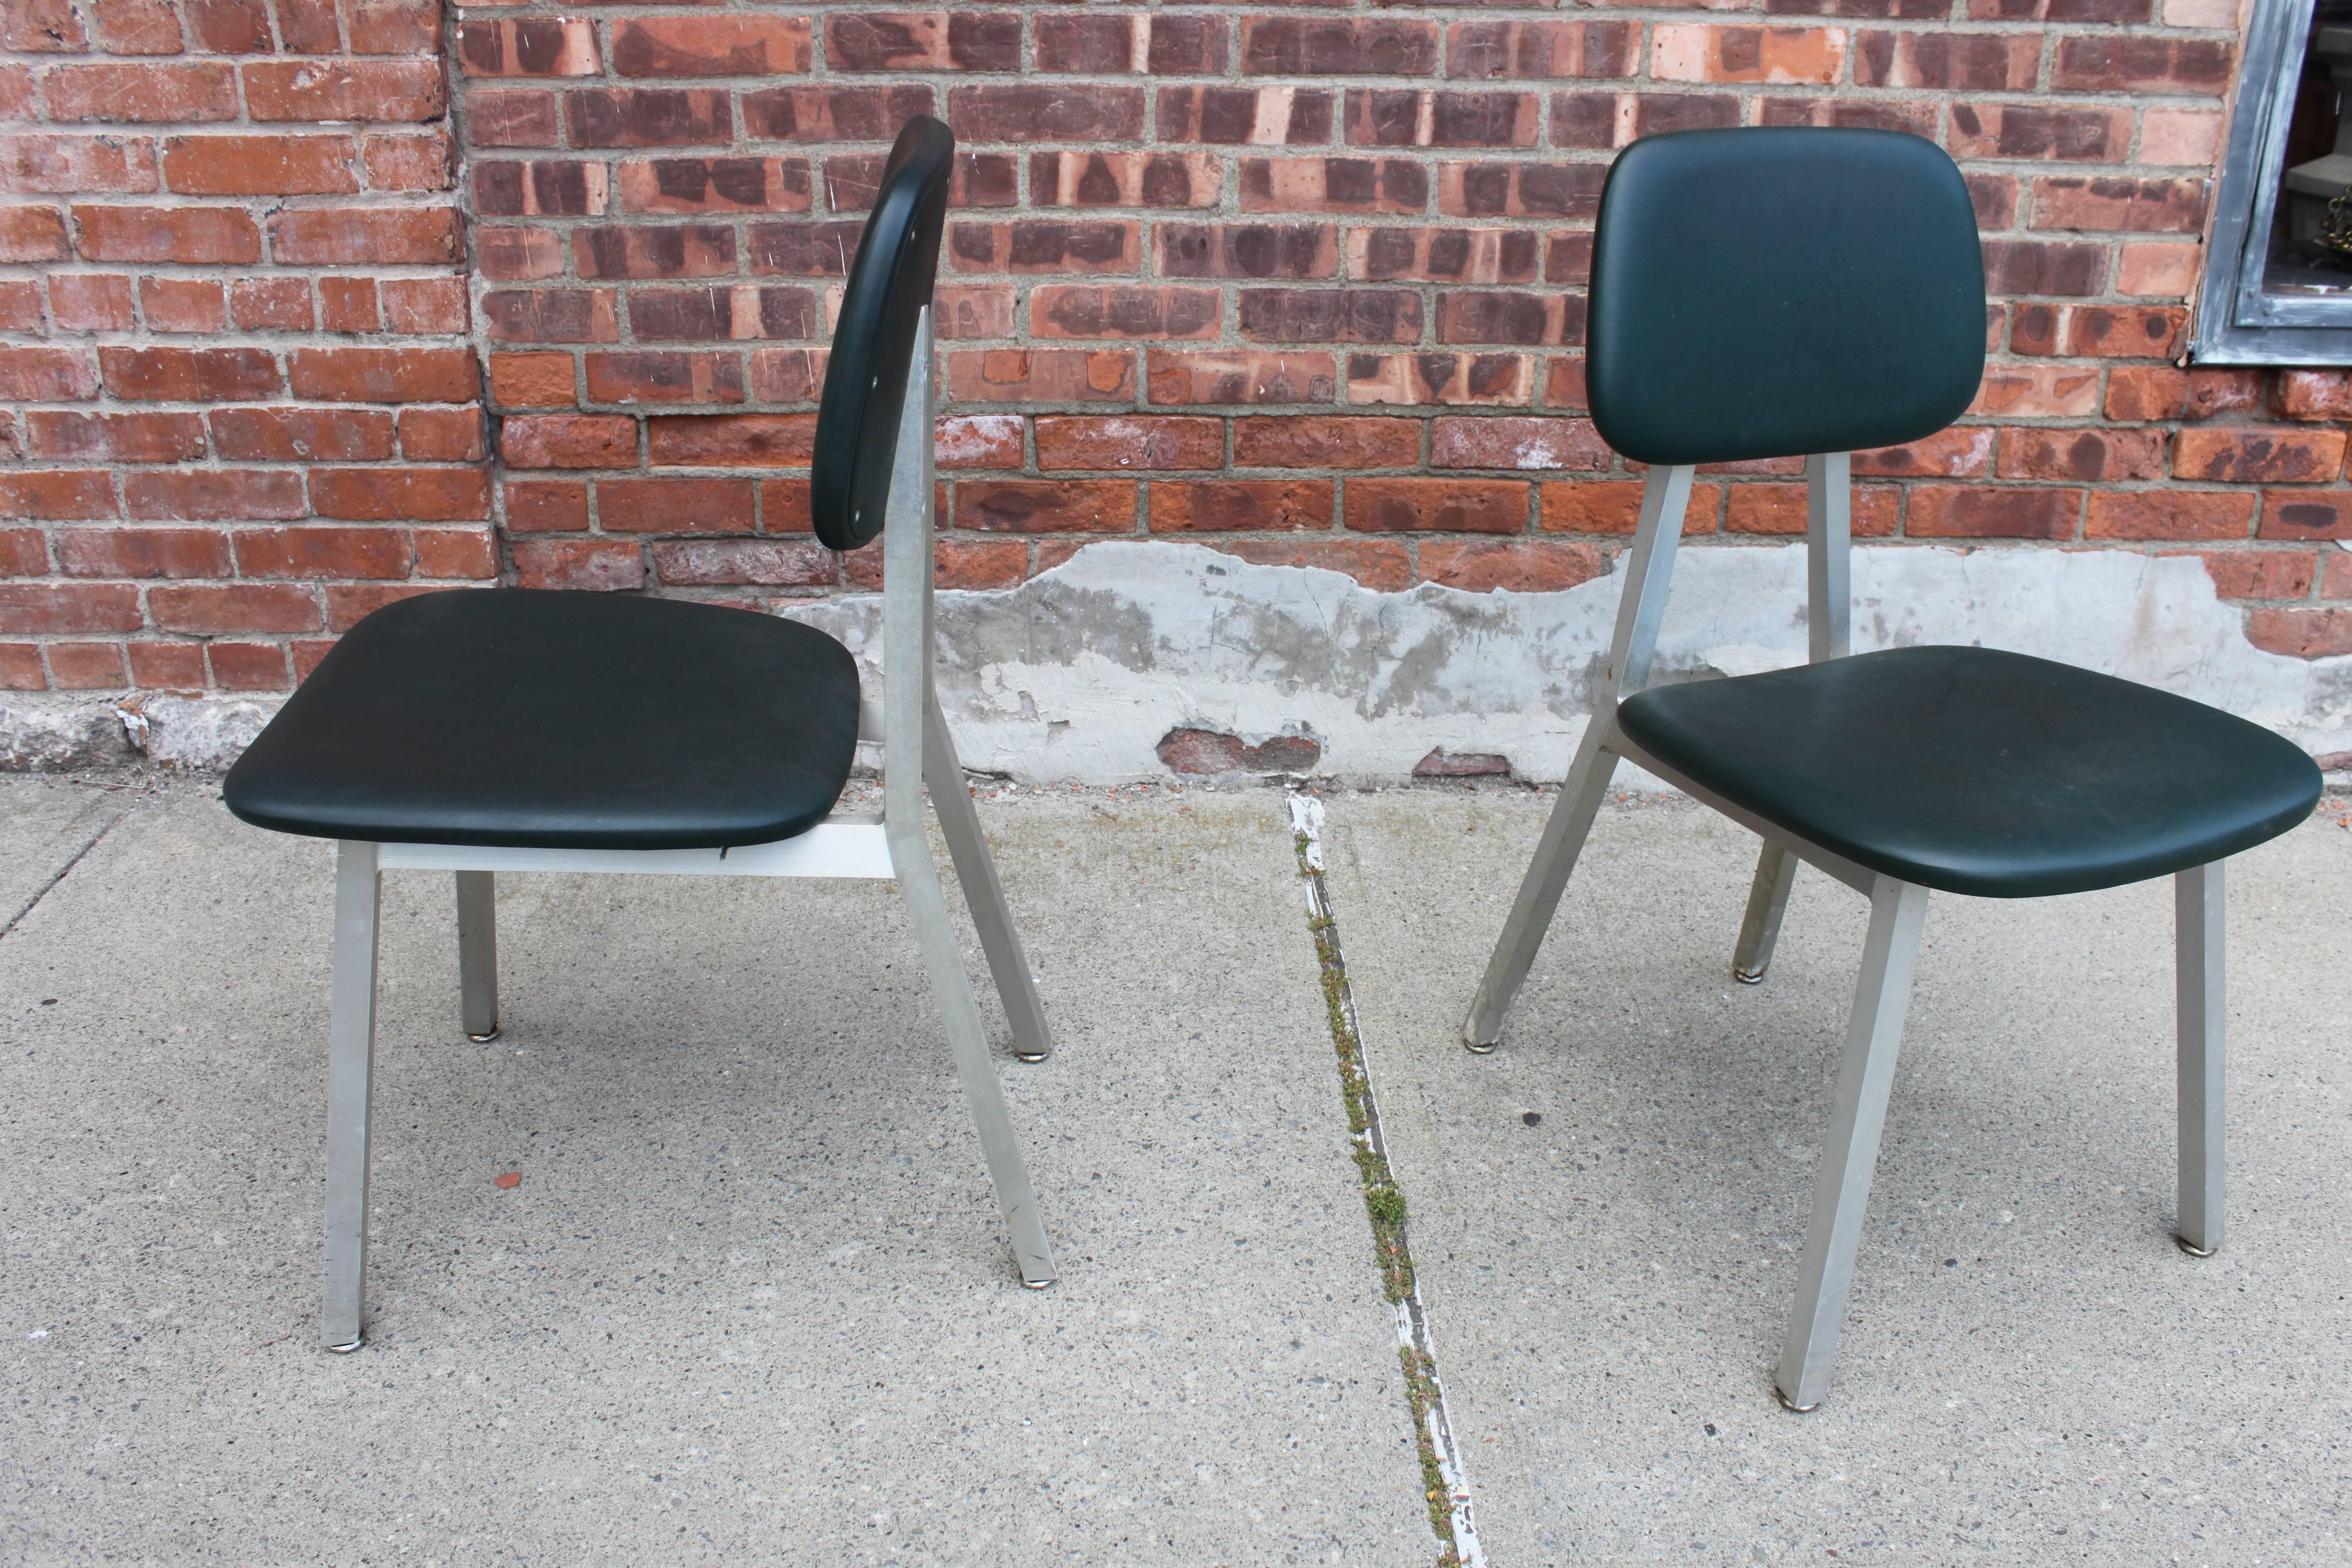 Great Mid-Century Industrial chairs by Shaw Walker. Dated 1961. In original condition. Aluminium base. One small tear under seat which is not noticeable.